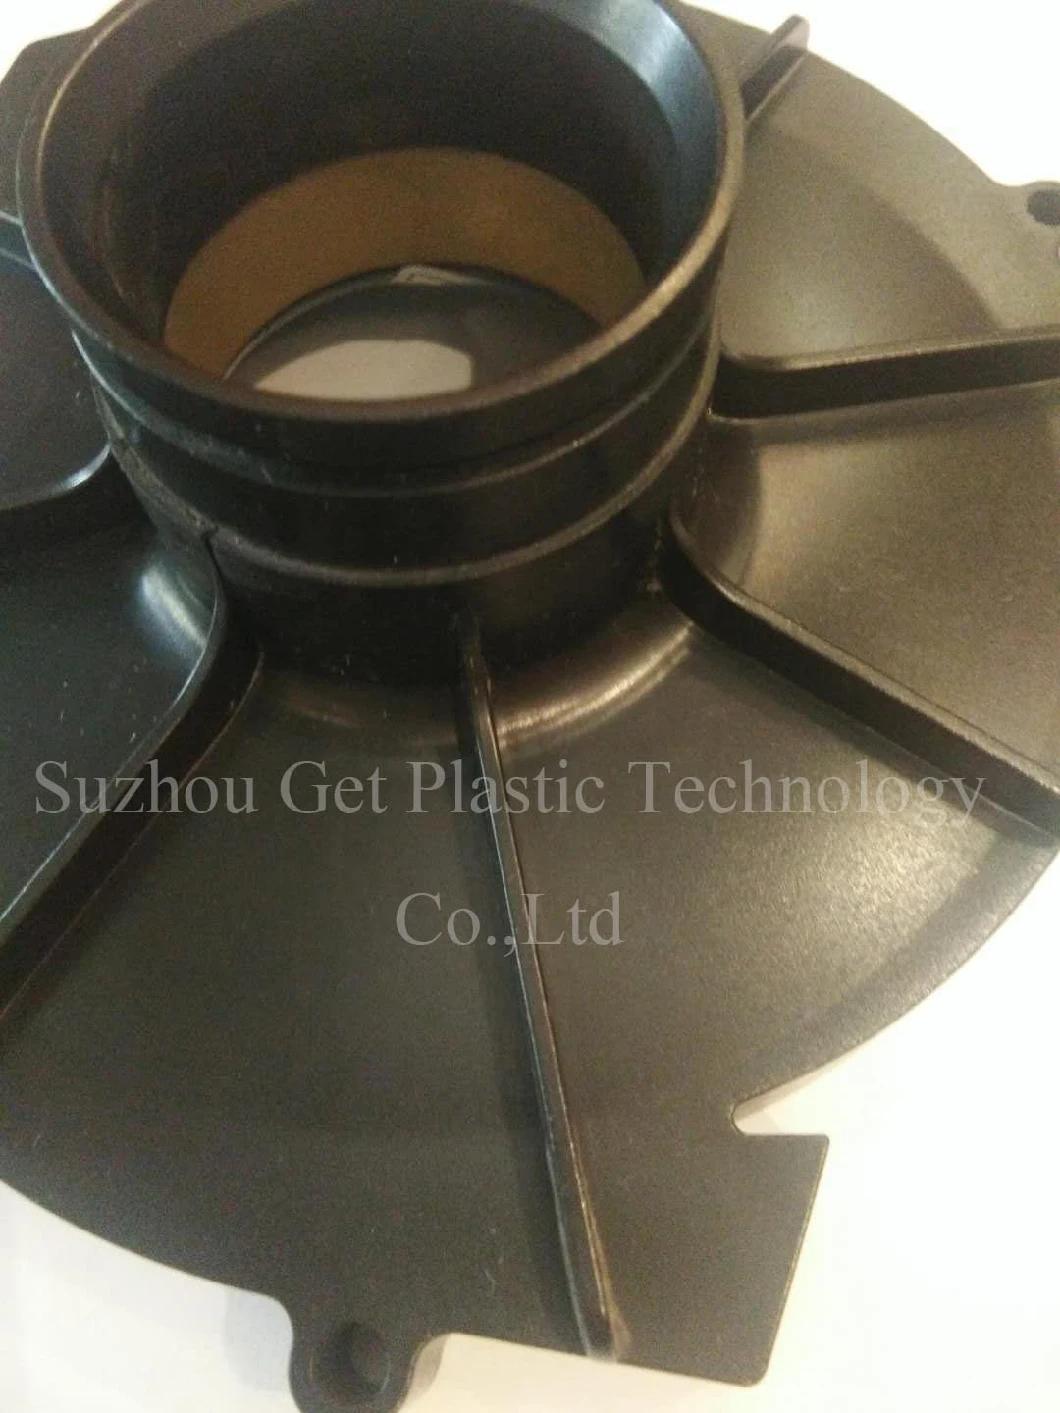 Plastic Parts Are Suitable for Industrial Equipment